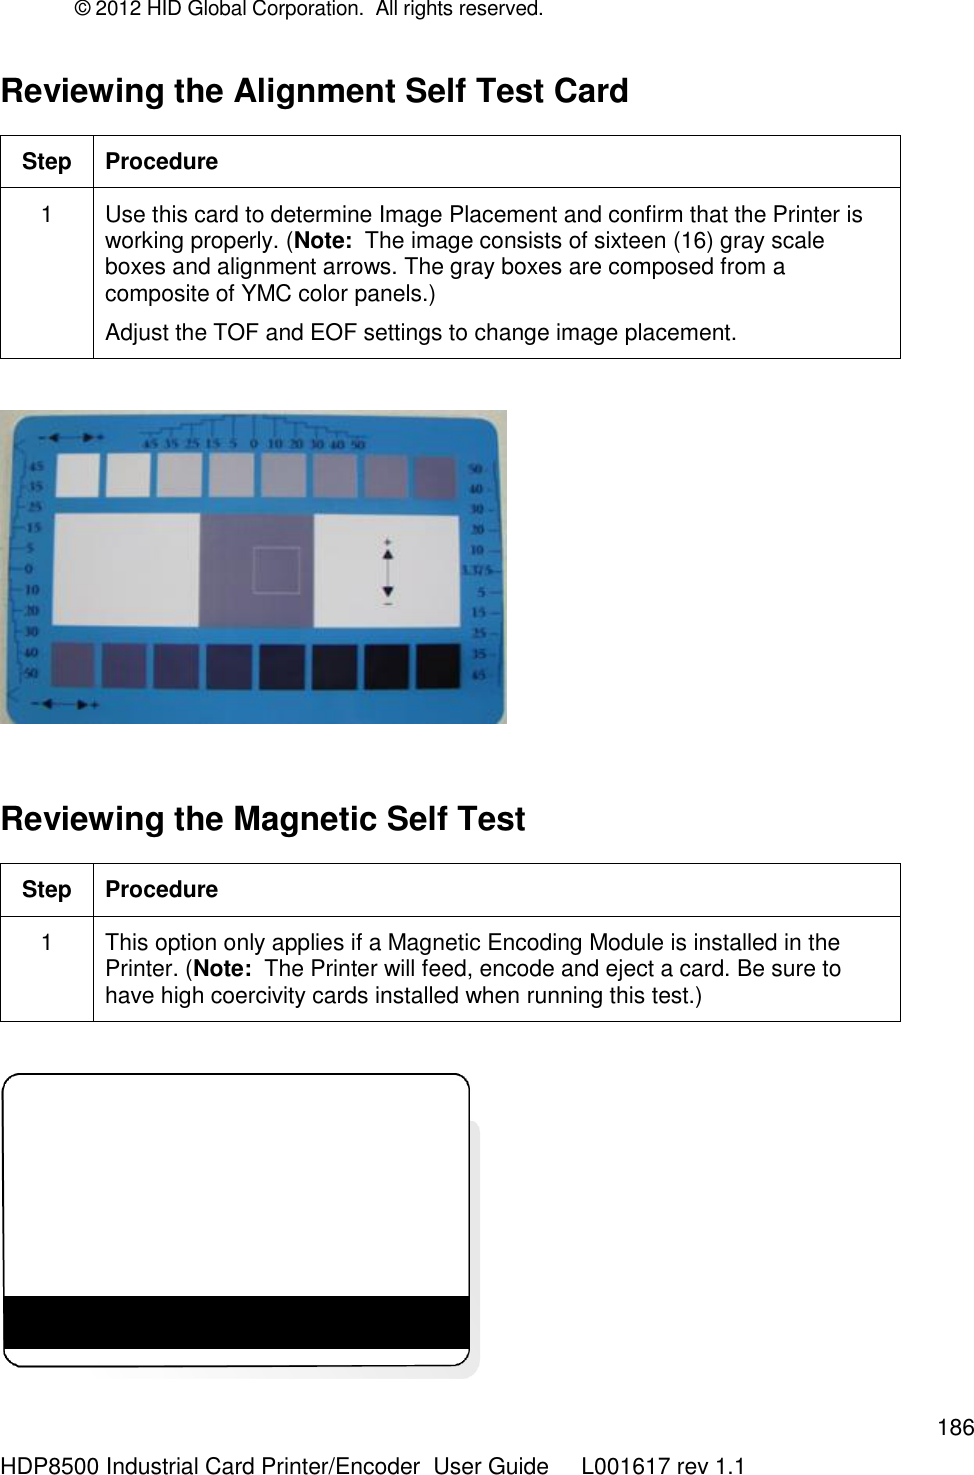 © 2012 HID Global Corporation.  All rights reserved.  186 HDP8500 Industrial Card Printer/Encoder  User Guide     L001617 rev 1.1 Reviewing the Alignment Self Test Card   Step Procedure 1 Use this card to determine Image Placement and confirm that the Printer is working properly. (Note:  The image consists of sixteen (16) gray scale boxes and alignment arrows. The gray boxes are composed from a composite of YMC color panels.) Adjust the TOF and EOF settings to change image placement.    Reviewing the Magnetic Self Test Step Procedure 1 This option only applies if a Magnetic Encoding Module is installed in the Printer. (Note:  The Printer will feed, encode and eject a card. Be sure to have high coercivity cards installed when running this test.)   